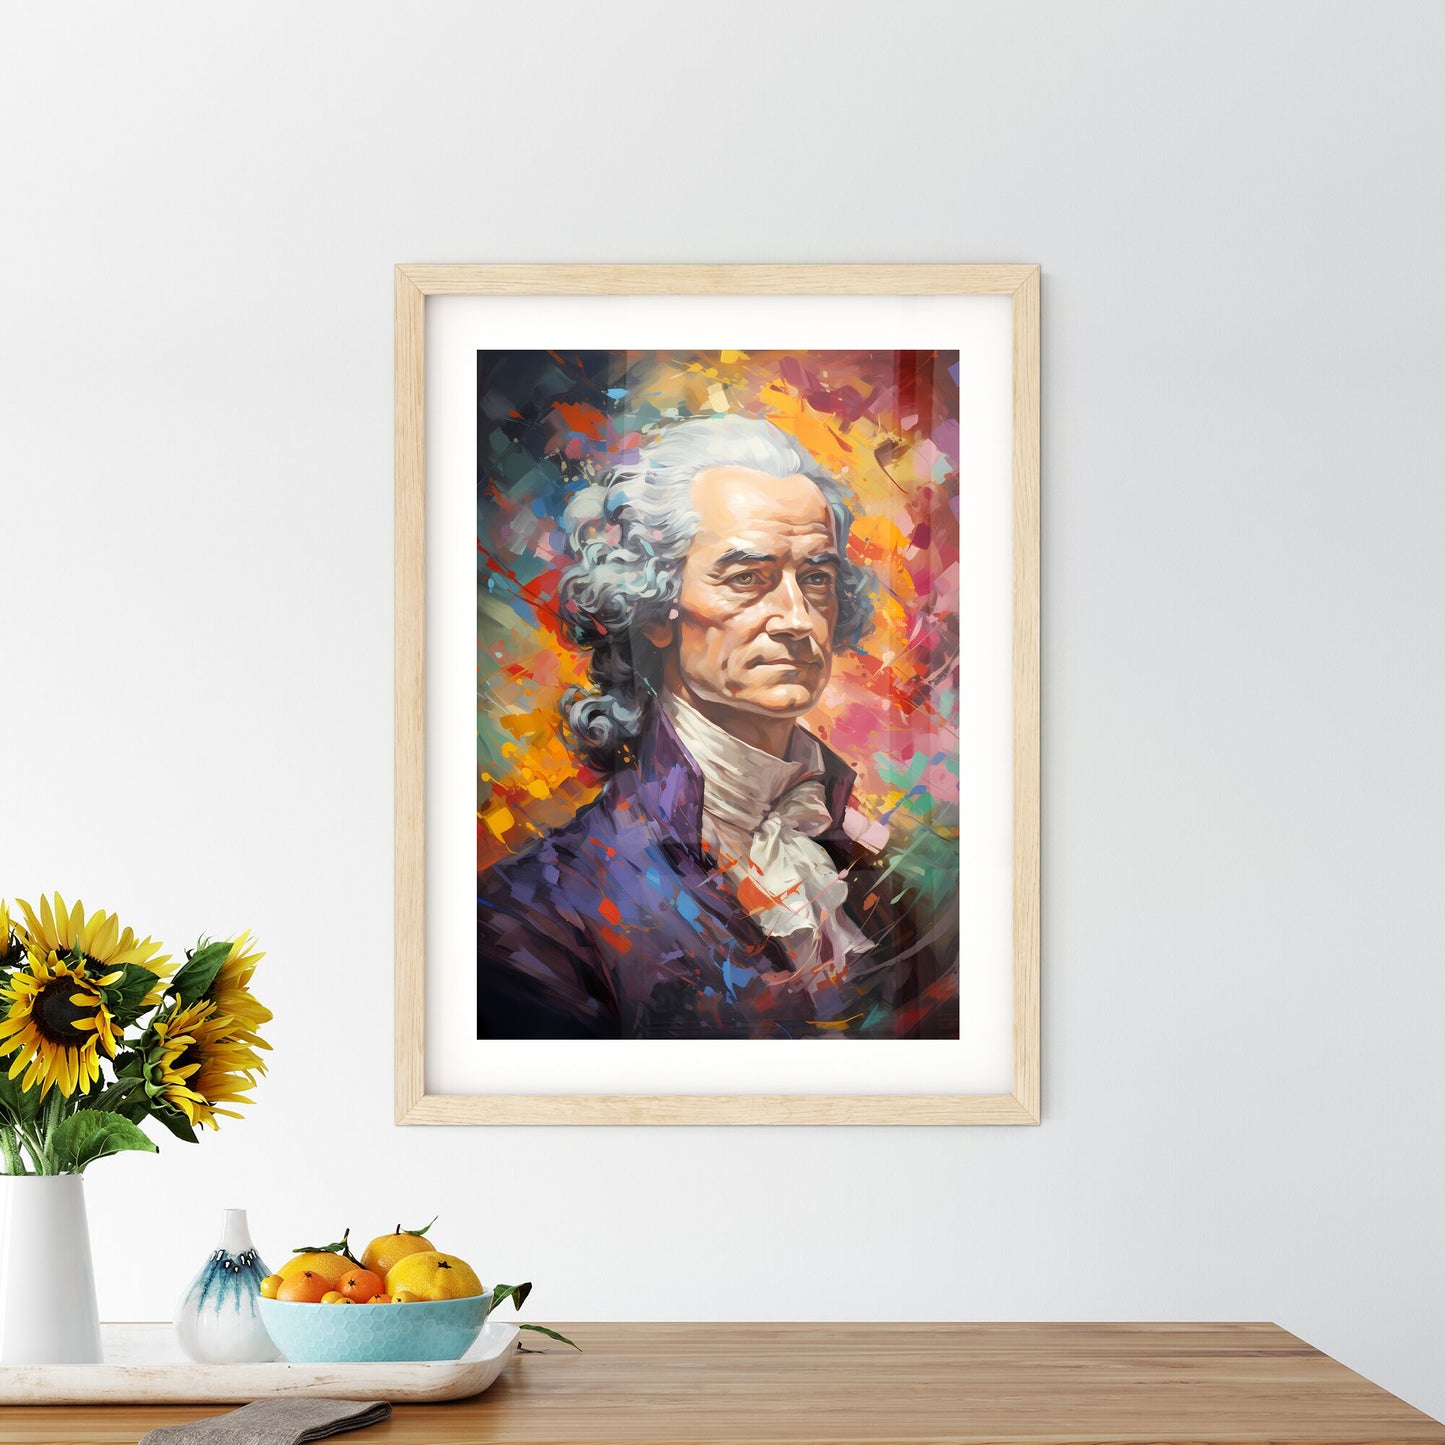 Voltaire French Enlightenment Writer Philosopher - A Painting Of A Man With A White Hair And A Blue Jacket Default Title